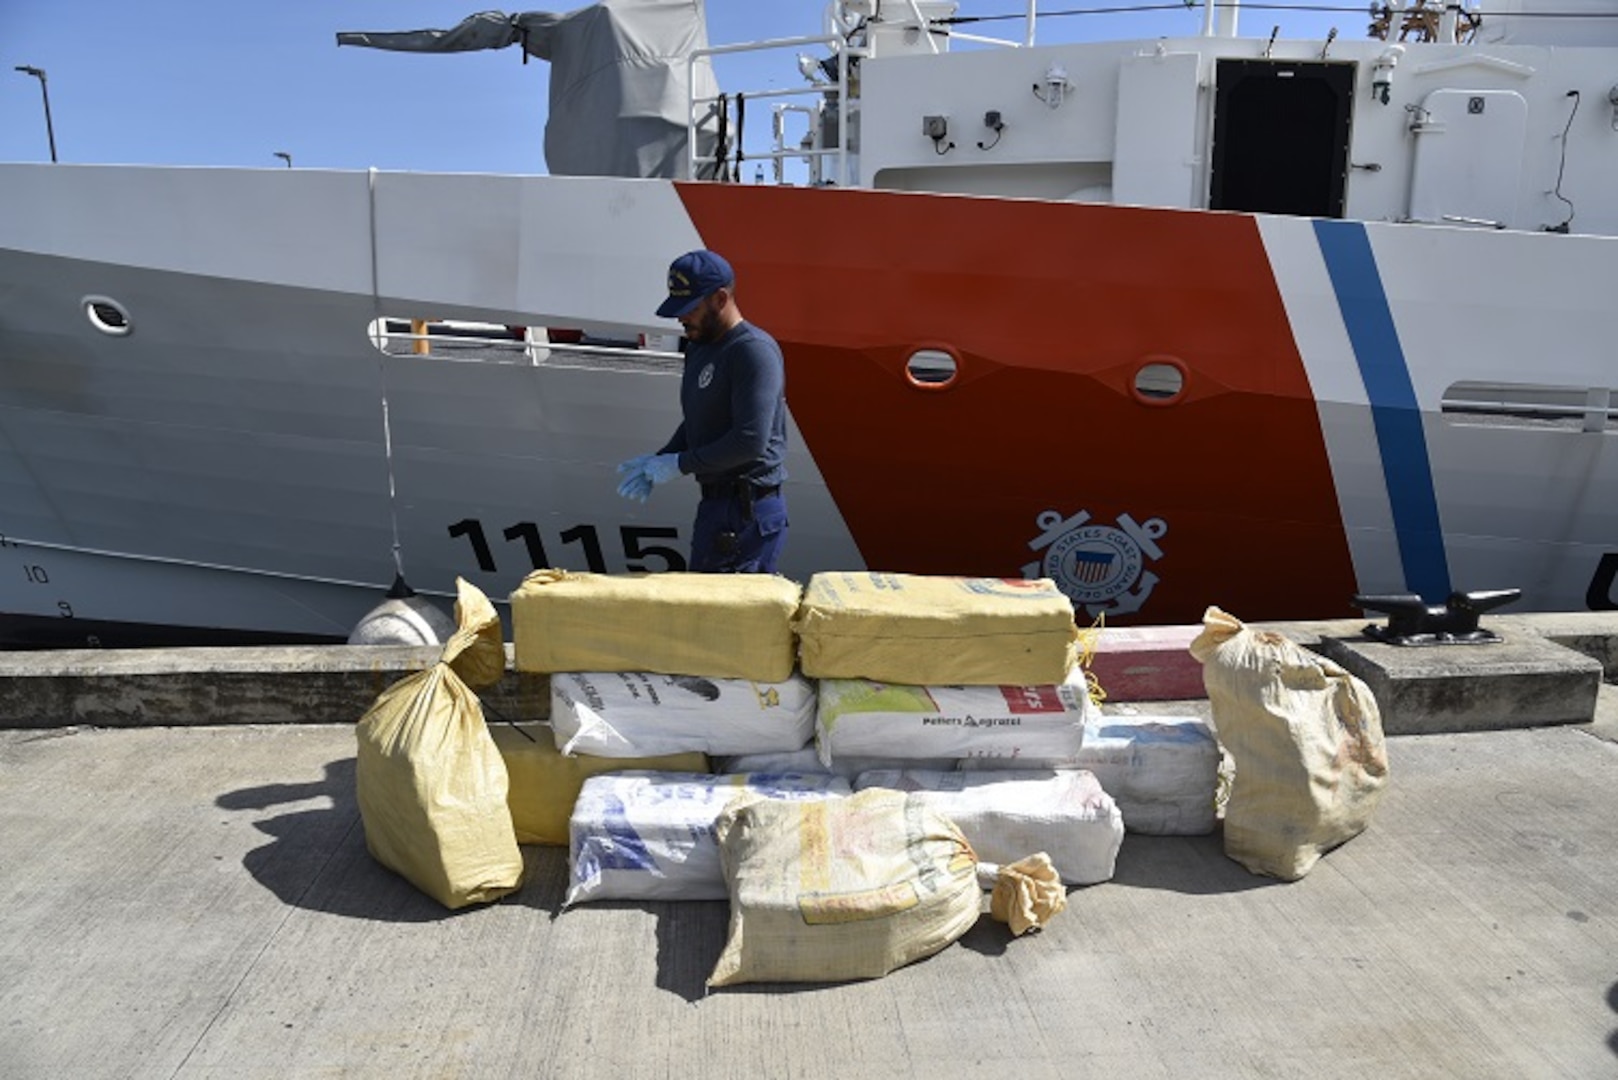 Coast Guard Cutter Joseph Napier crewmember helps offload 901 pounds of cocaine in San Juan, Puerto Rico, May 3, 2023.  The cutter crew also transferred three suspected smugglers apprehended in this case were to federal agents, following the interdiction of a drug smuggling go-fast vessel north of Puerto Rico, April 29, 2023.  (U.S. Coast Guard photo)